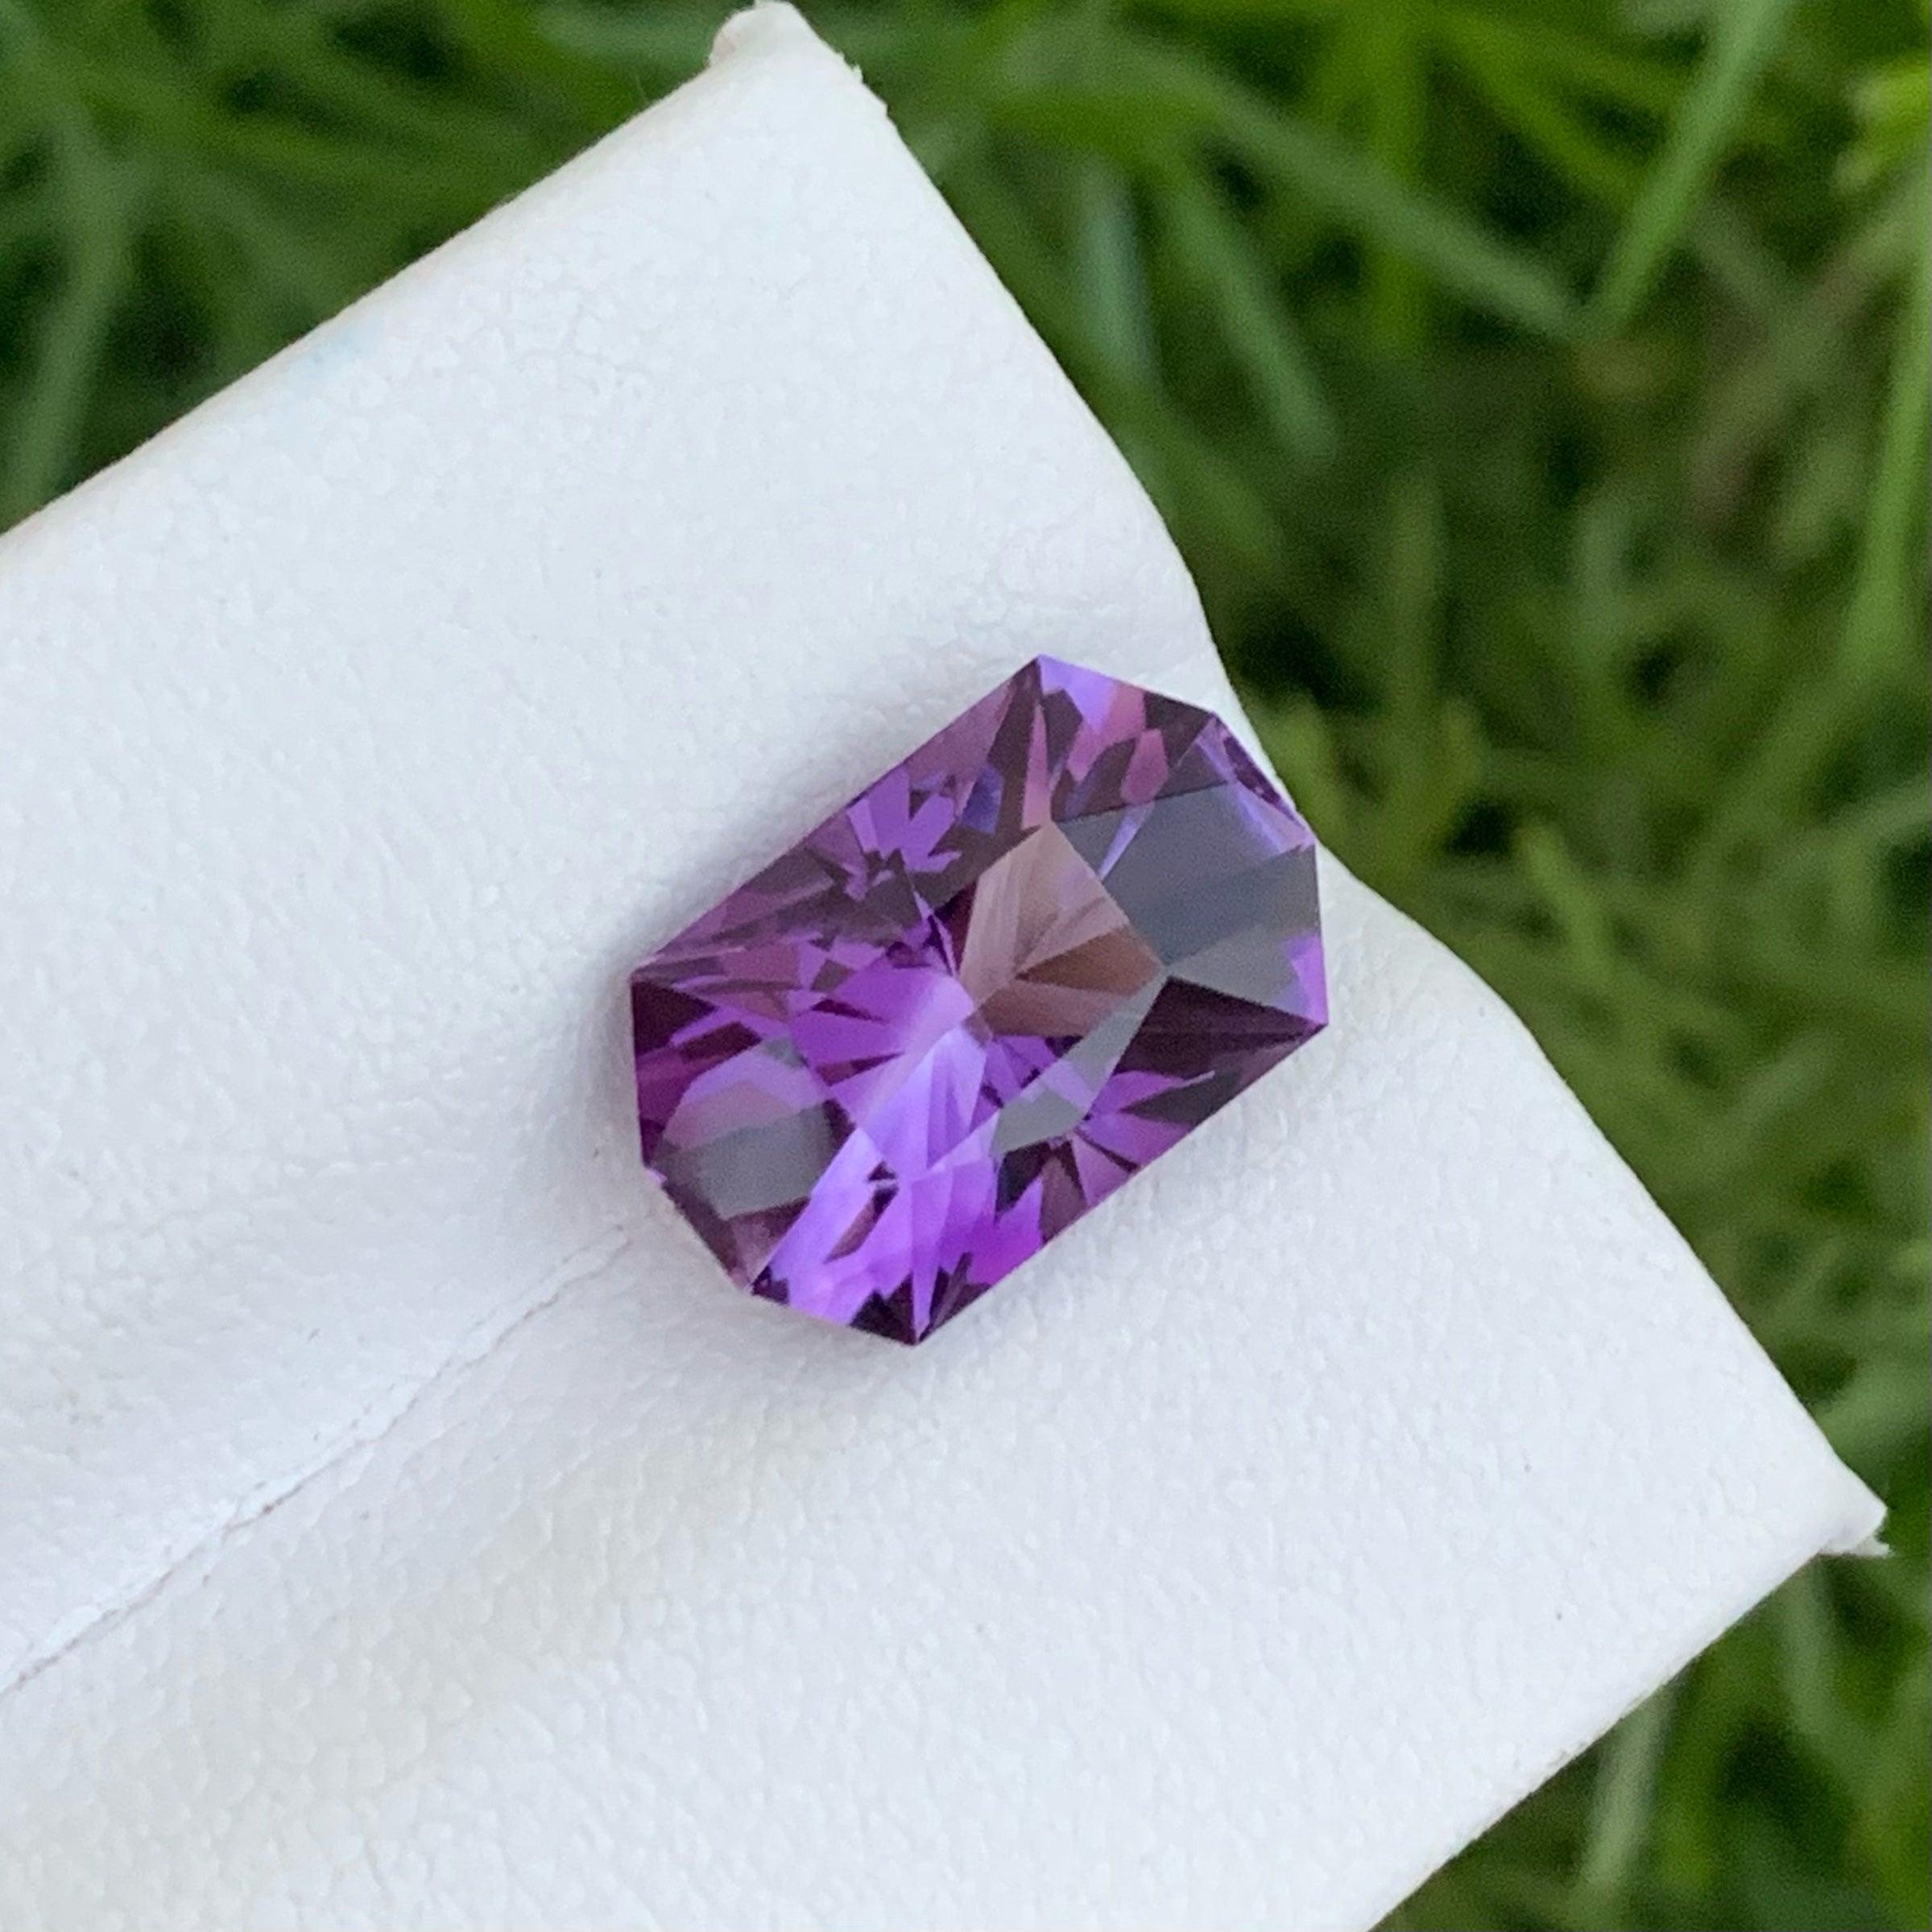 Modern Exquisite Fancy Cut Loose Amethyst Gemstone 4.35 Carats Amethyst Jewelry For Sale